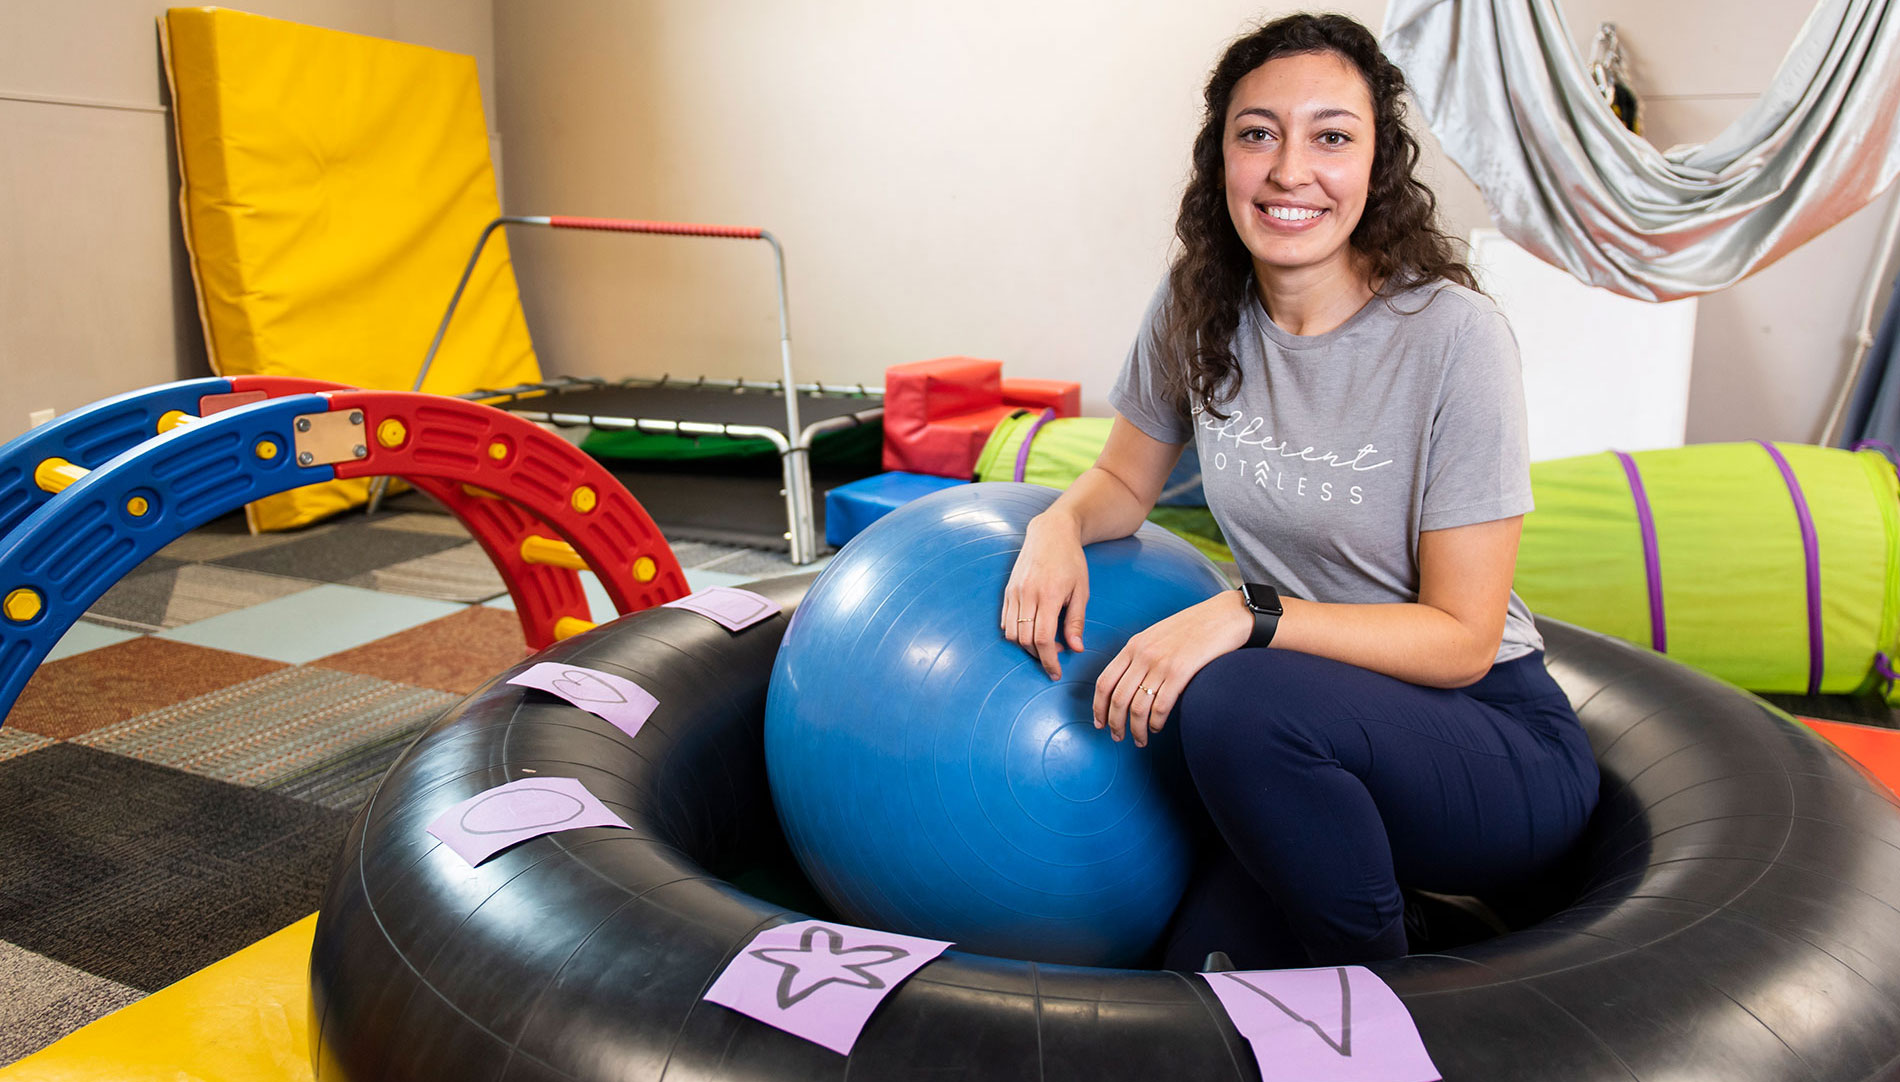             Real-World Training Positions Psychology Major for Career as Occupational Therapist     